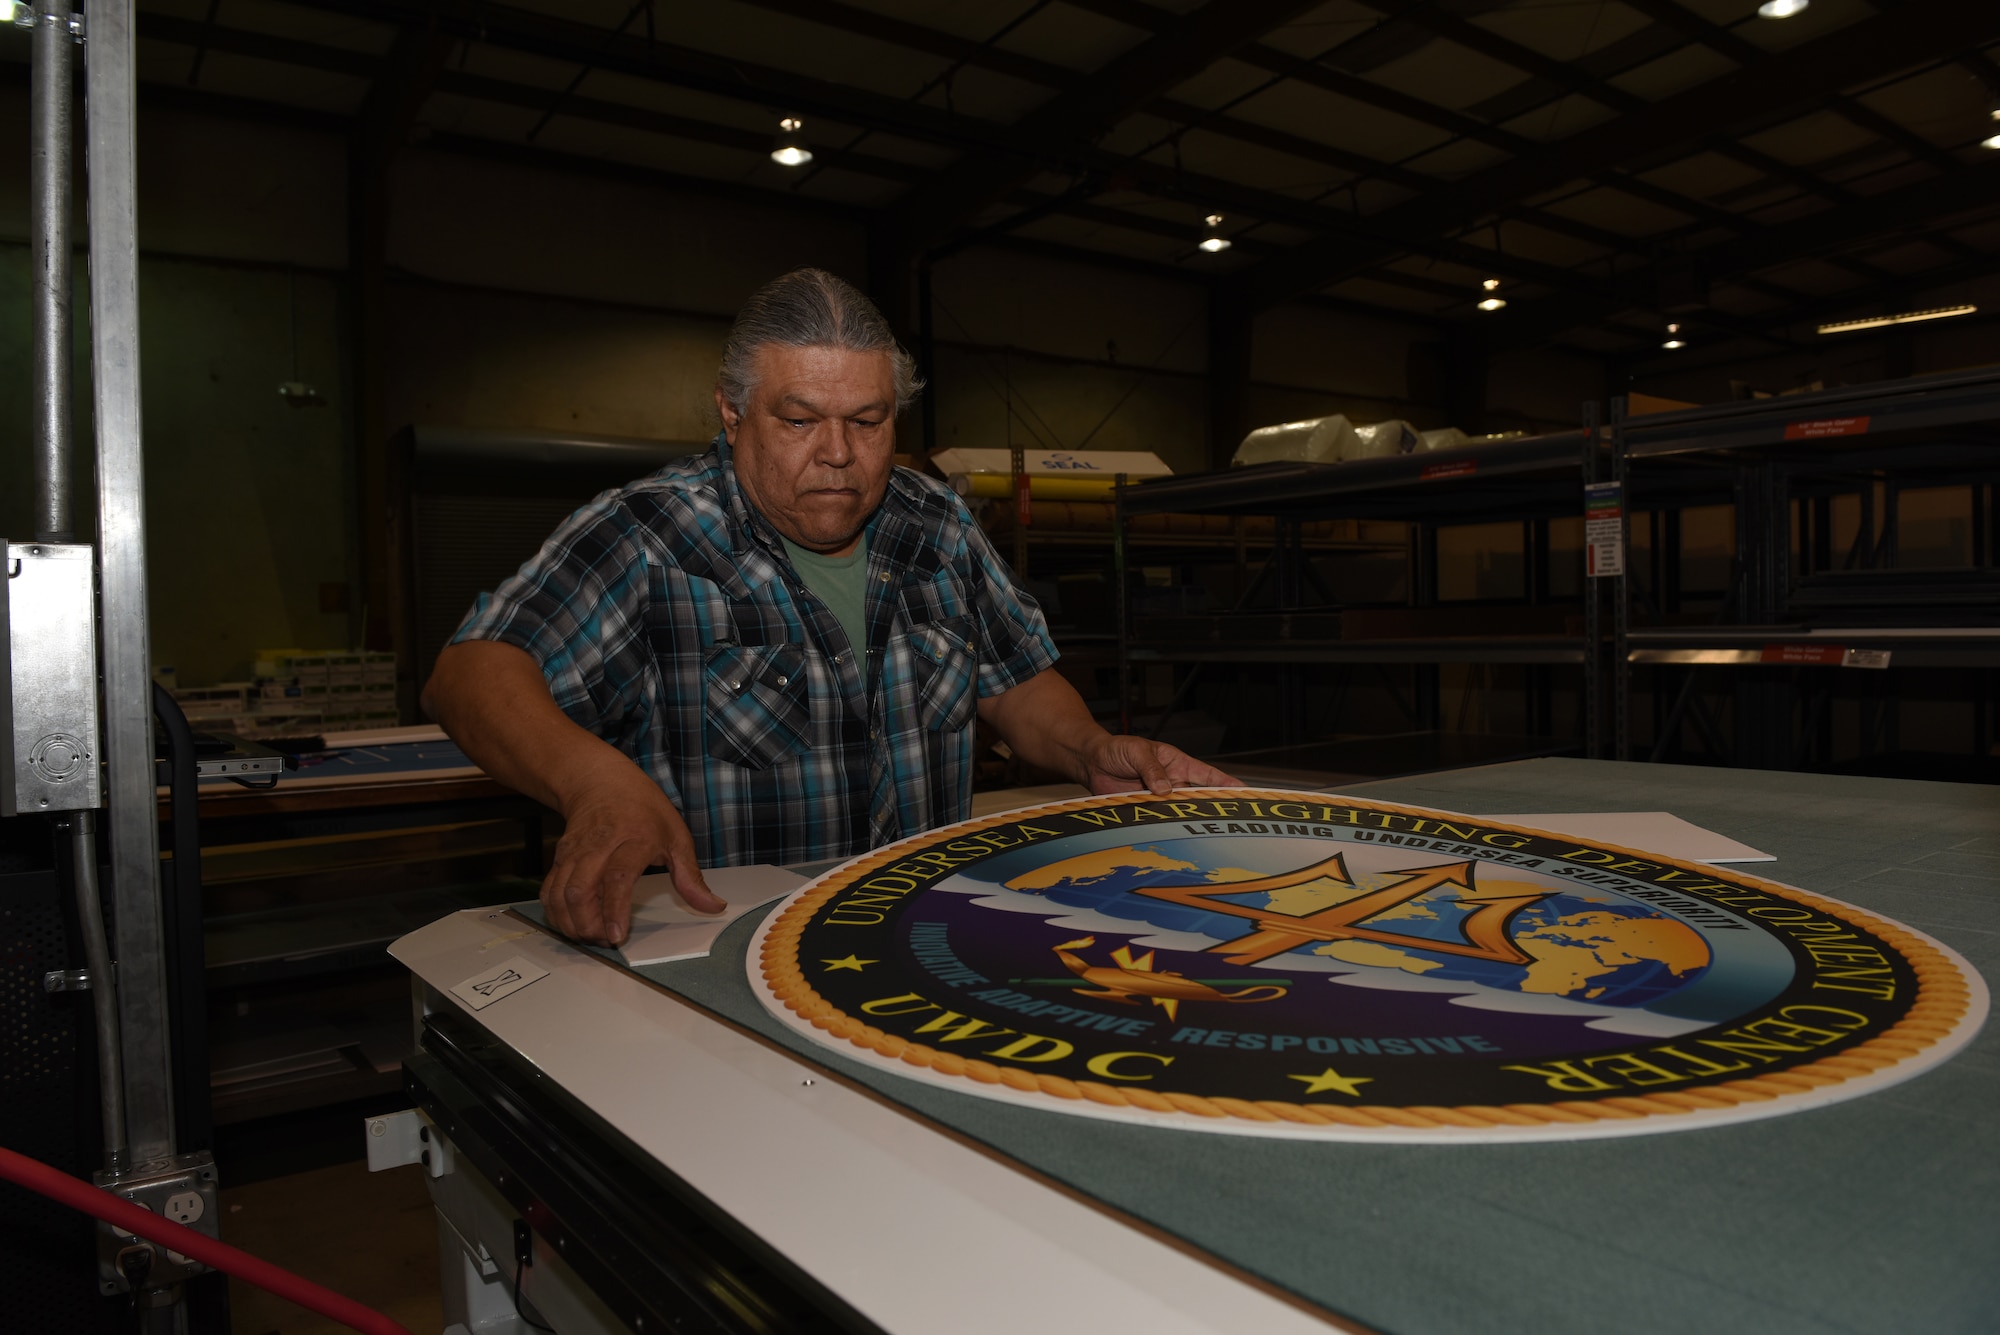 Carlos Castro, Defense Logistics Agency, showcases a large decal Feb. 7, 2019, at Travis Air Force Base, Calif., after the decal was cut by a flatbed cutter. The Travis DLA facility provides a variety of printing services to federal agencies and government offices. (U.S. Air Force photo by Tech. Sgt. James Hodgman)